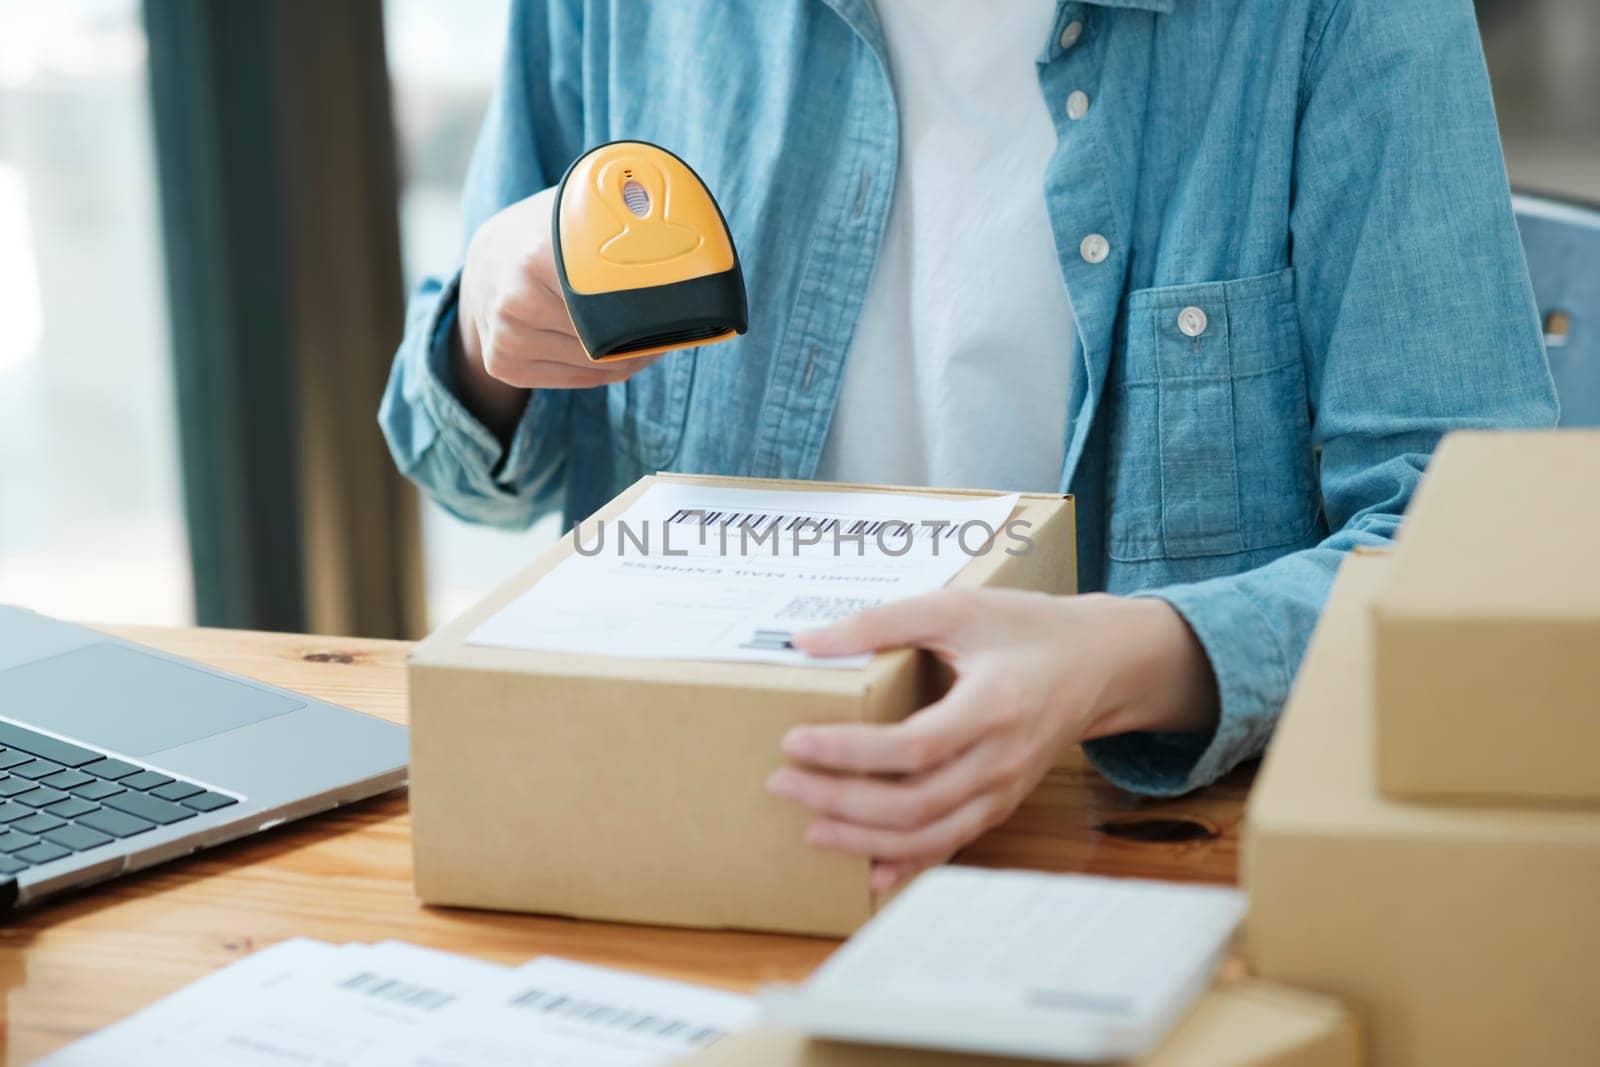 Scanning barcode on shipping label with handheld scanner. Order processing in e-commerce business. Package tracking and management concept.